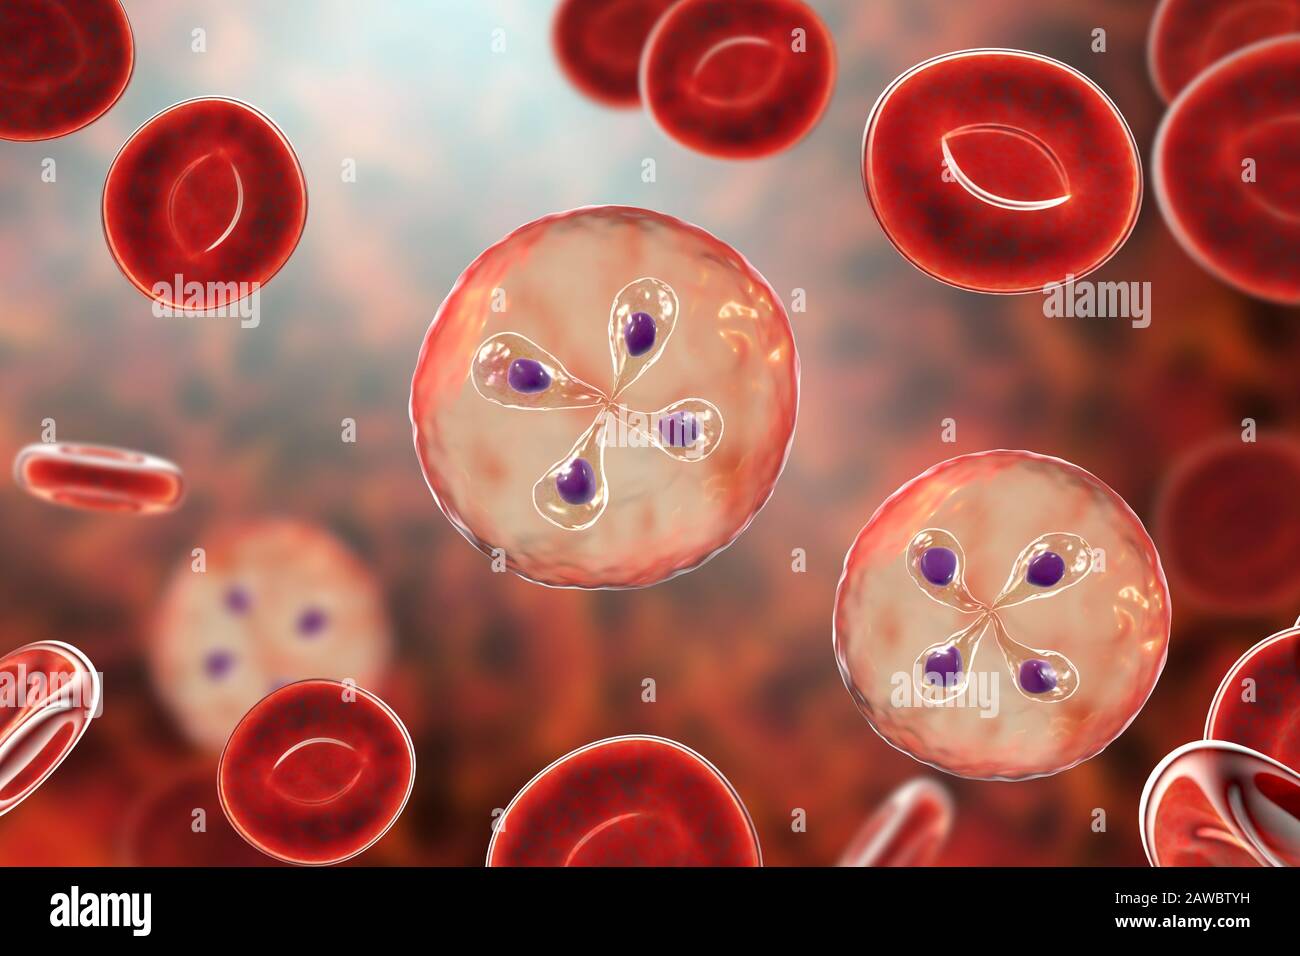 Babesia parasites inside red blood cell, illustration Stock Photo